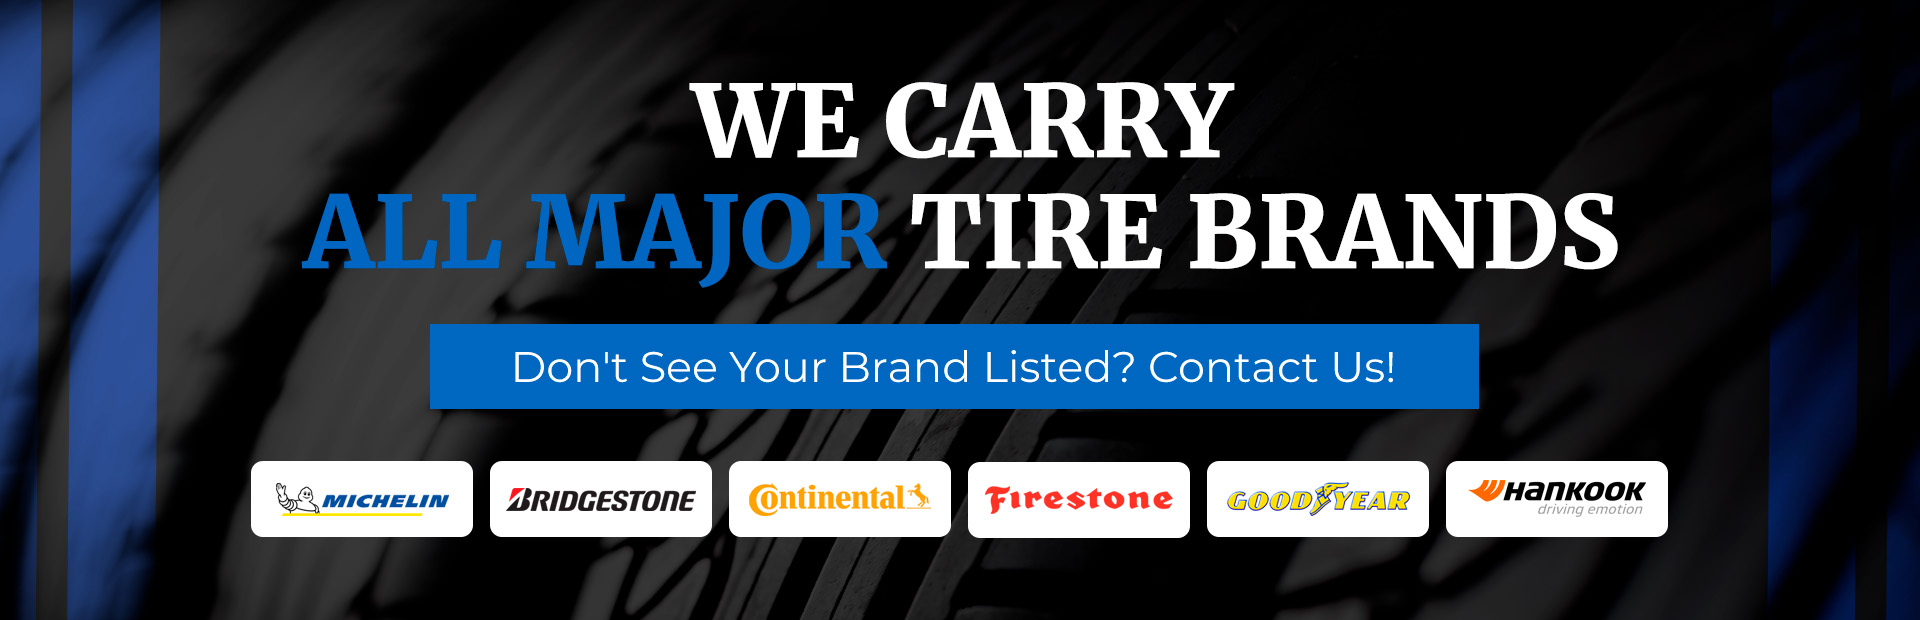 We carry all major tire brands. Don